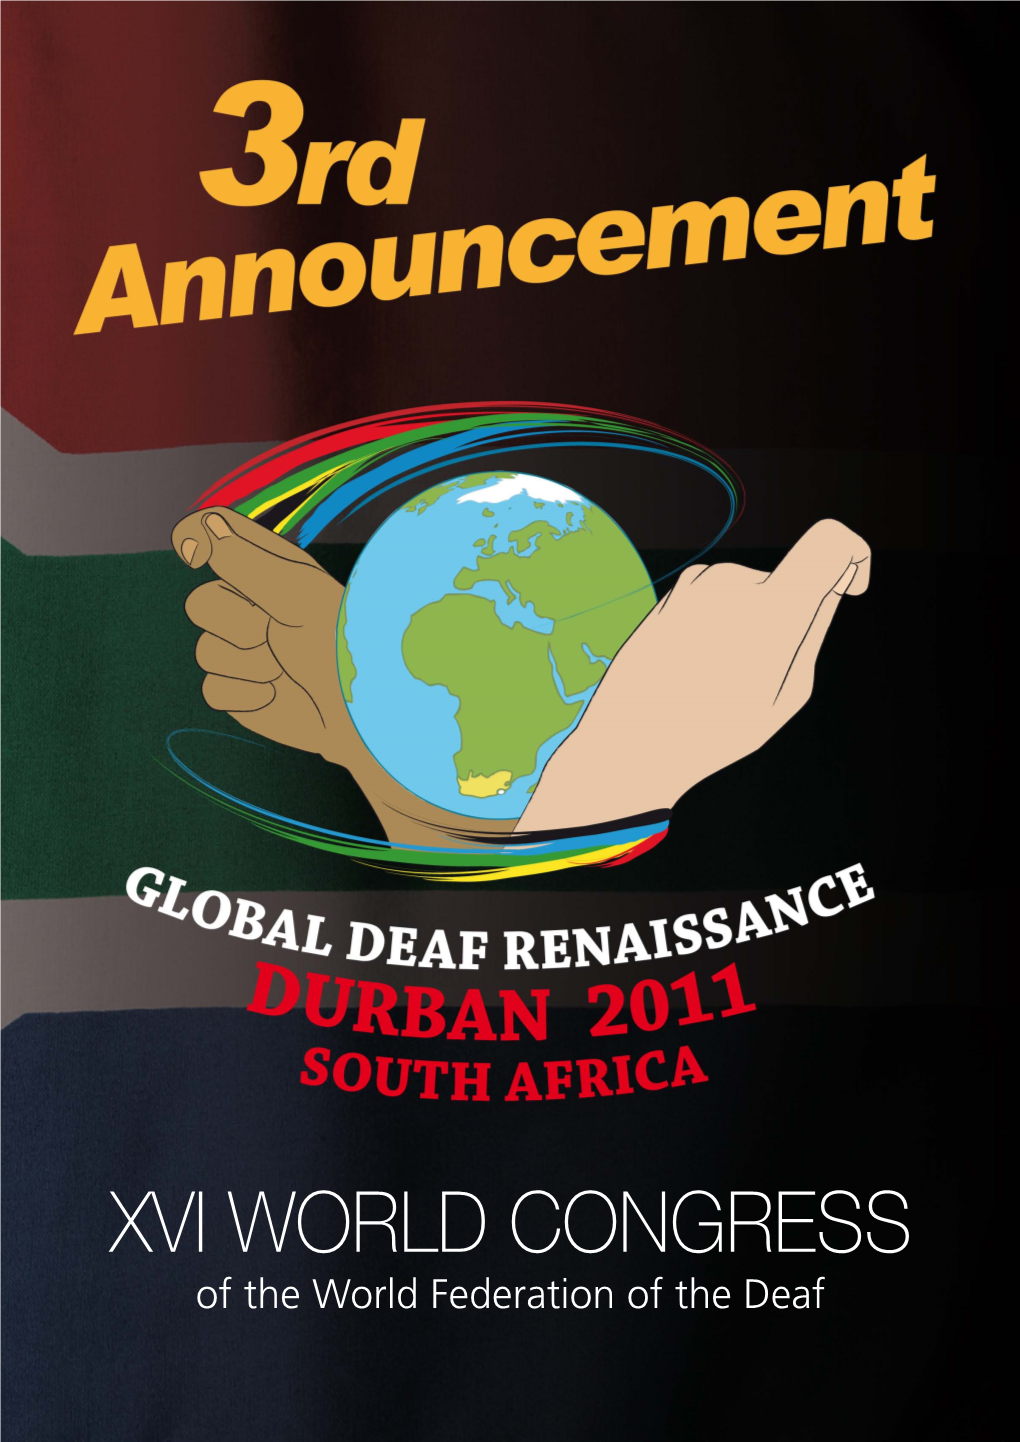 Of the World Federation of the Deaf